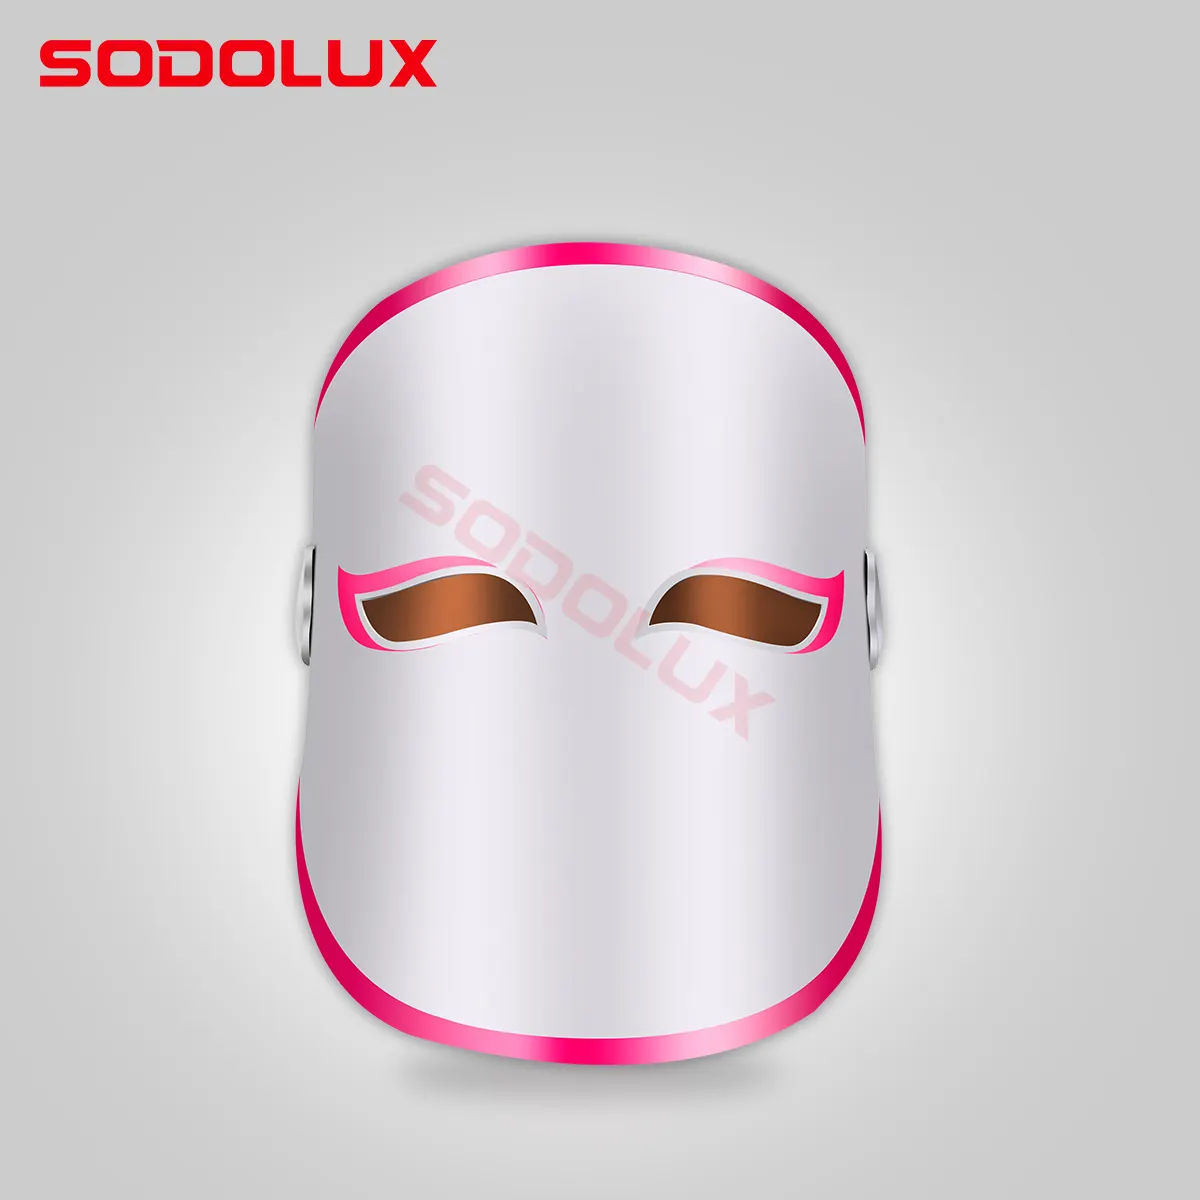 SODOLUX Light Therapy Mask LED Beauty Electrical Face Masker Silicon Device Photon Light Laser Mask For Facial Skin Care